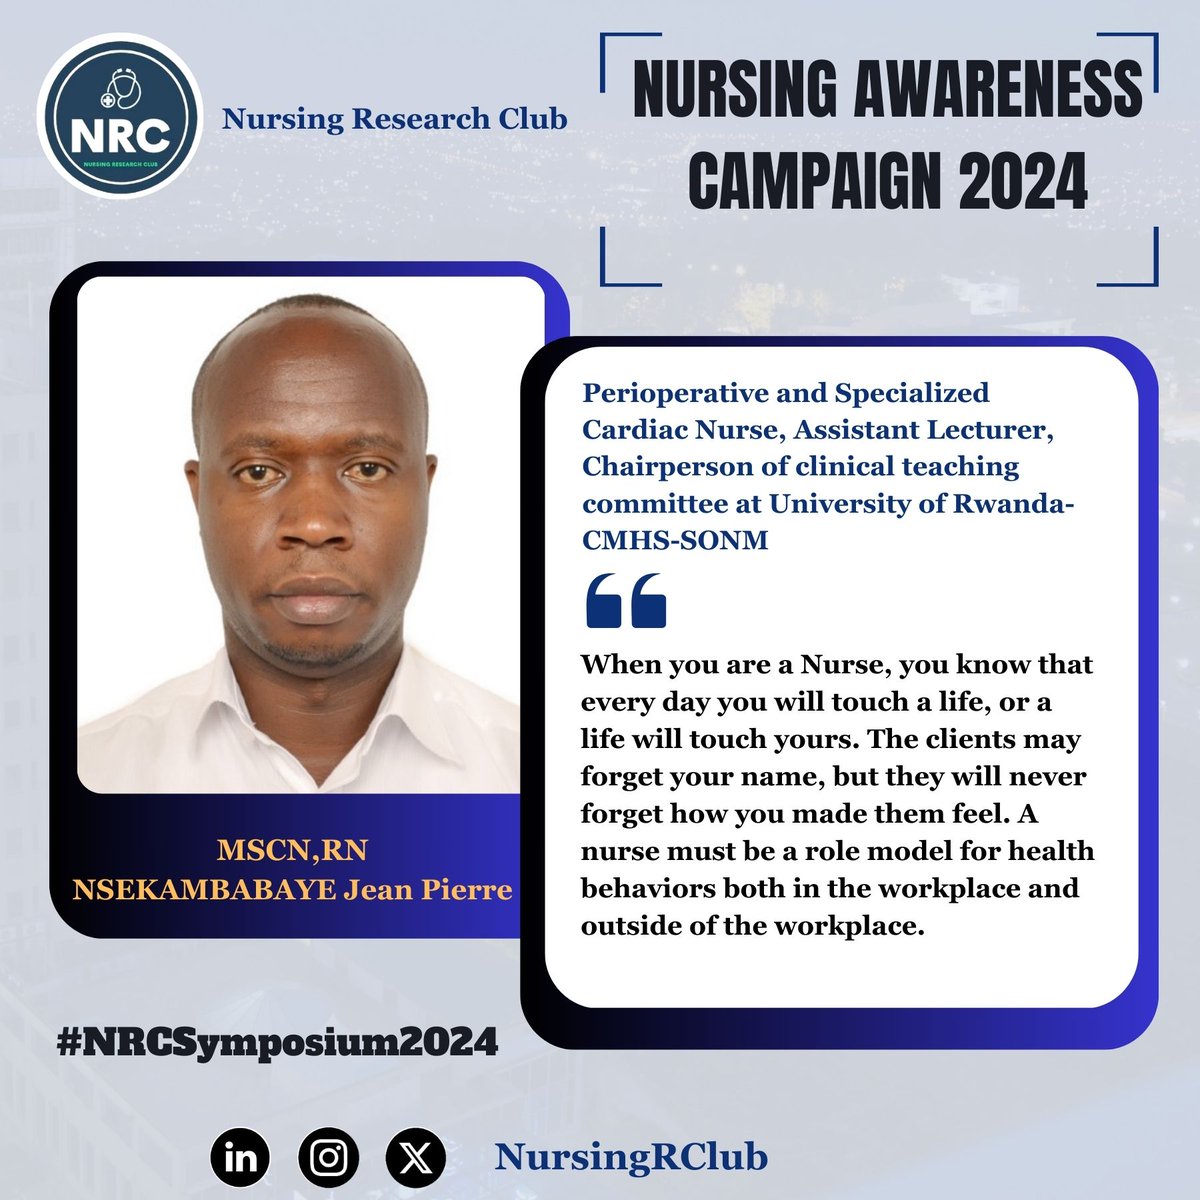 'When you are a Nurse, you know that every day you will touch a life, or a life will touch yours. The clients may forget your name, but they will never forget how you made them feel. Be a Nurse By Role modal'.#NSEKAMBABAYEJeanPierre #NRCNursingAwareness #NRCSymposium2024